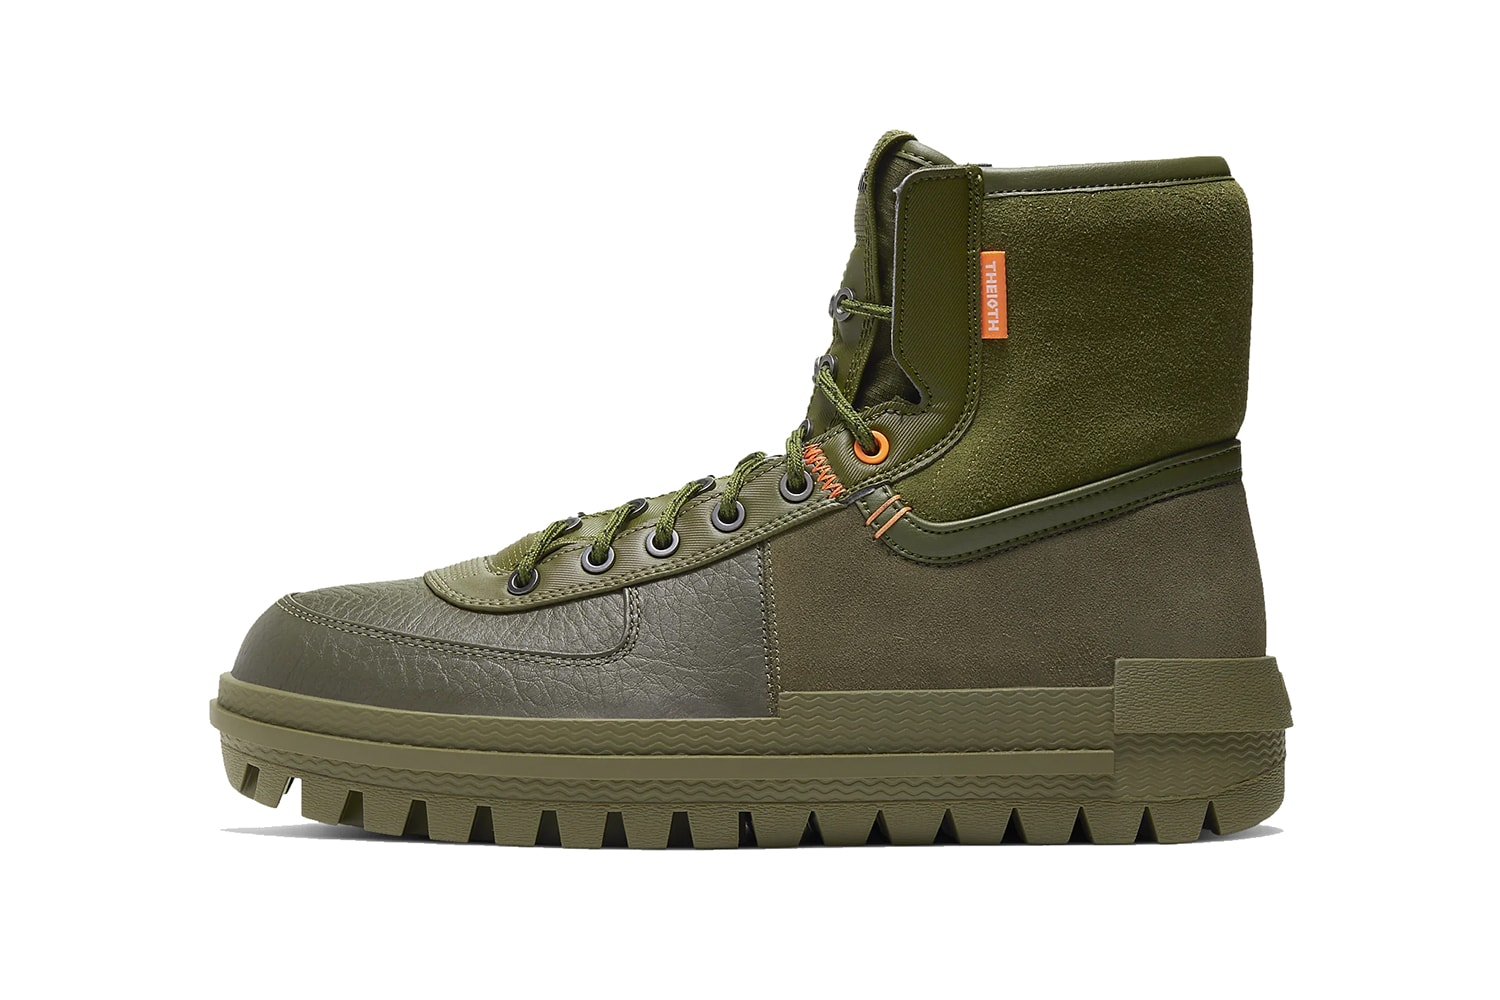 Nike Xarr Boot Release boots outwear winter snow rain military olive green sage green leather Air Force 1 shoes sneakers kicks the10th 